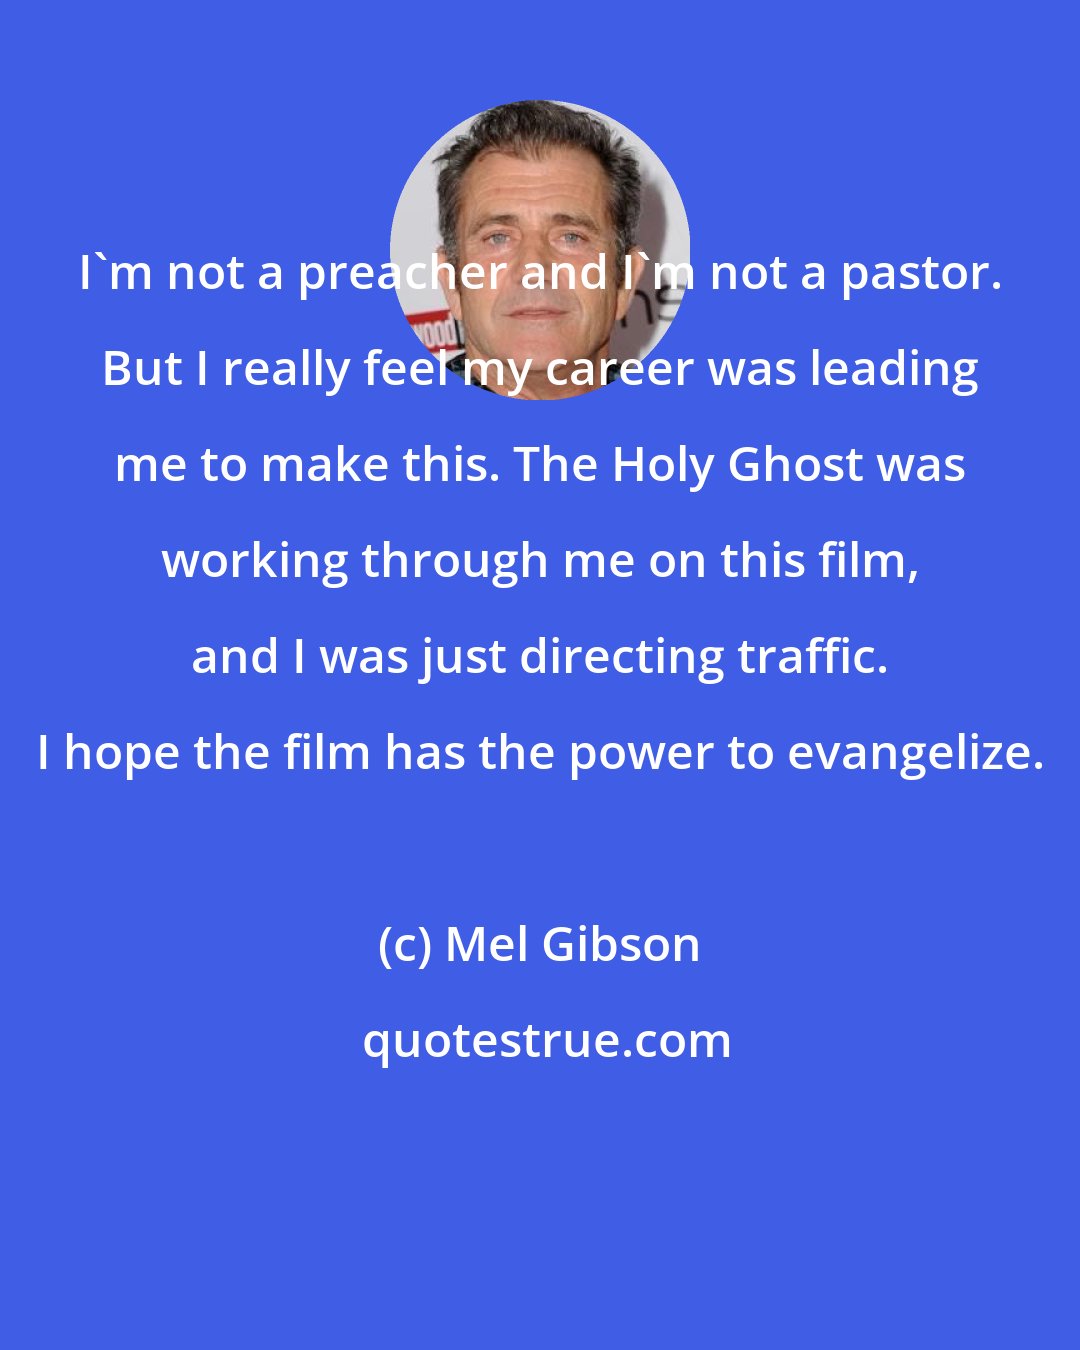 Mel Gibson: I'm not a preacher and I'm not a pastor. But I really feel my career was leading me to make this. The Holy Ghost was working through me on this film, and I was just directing traffic. I hope the film has the power to evangelize.